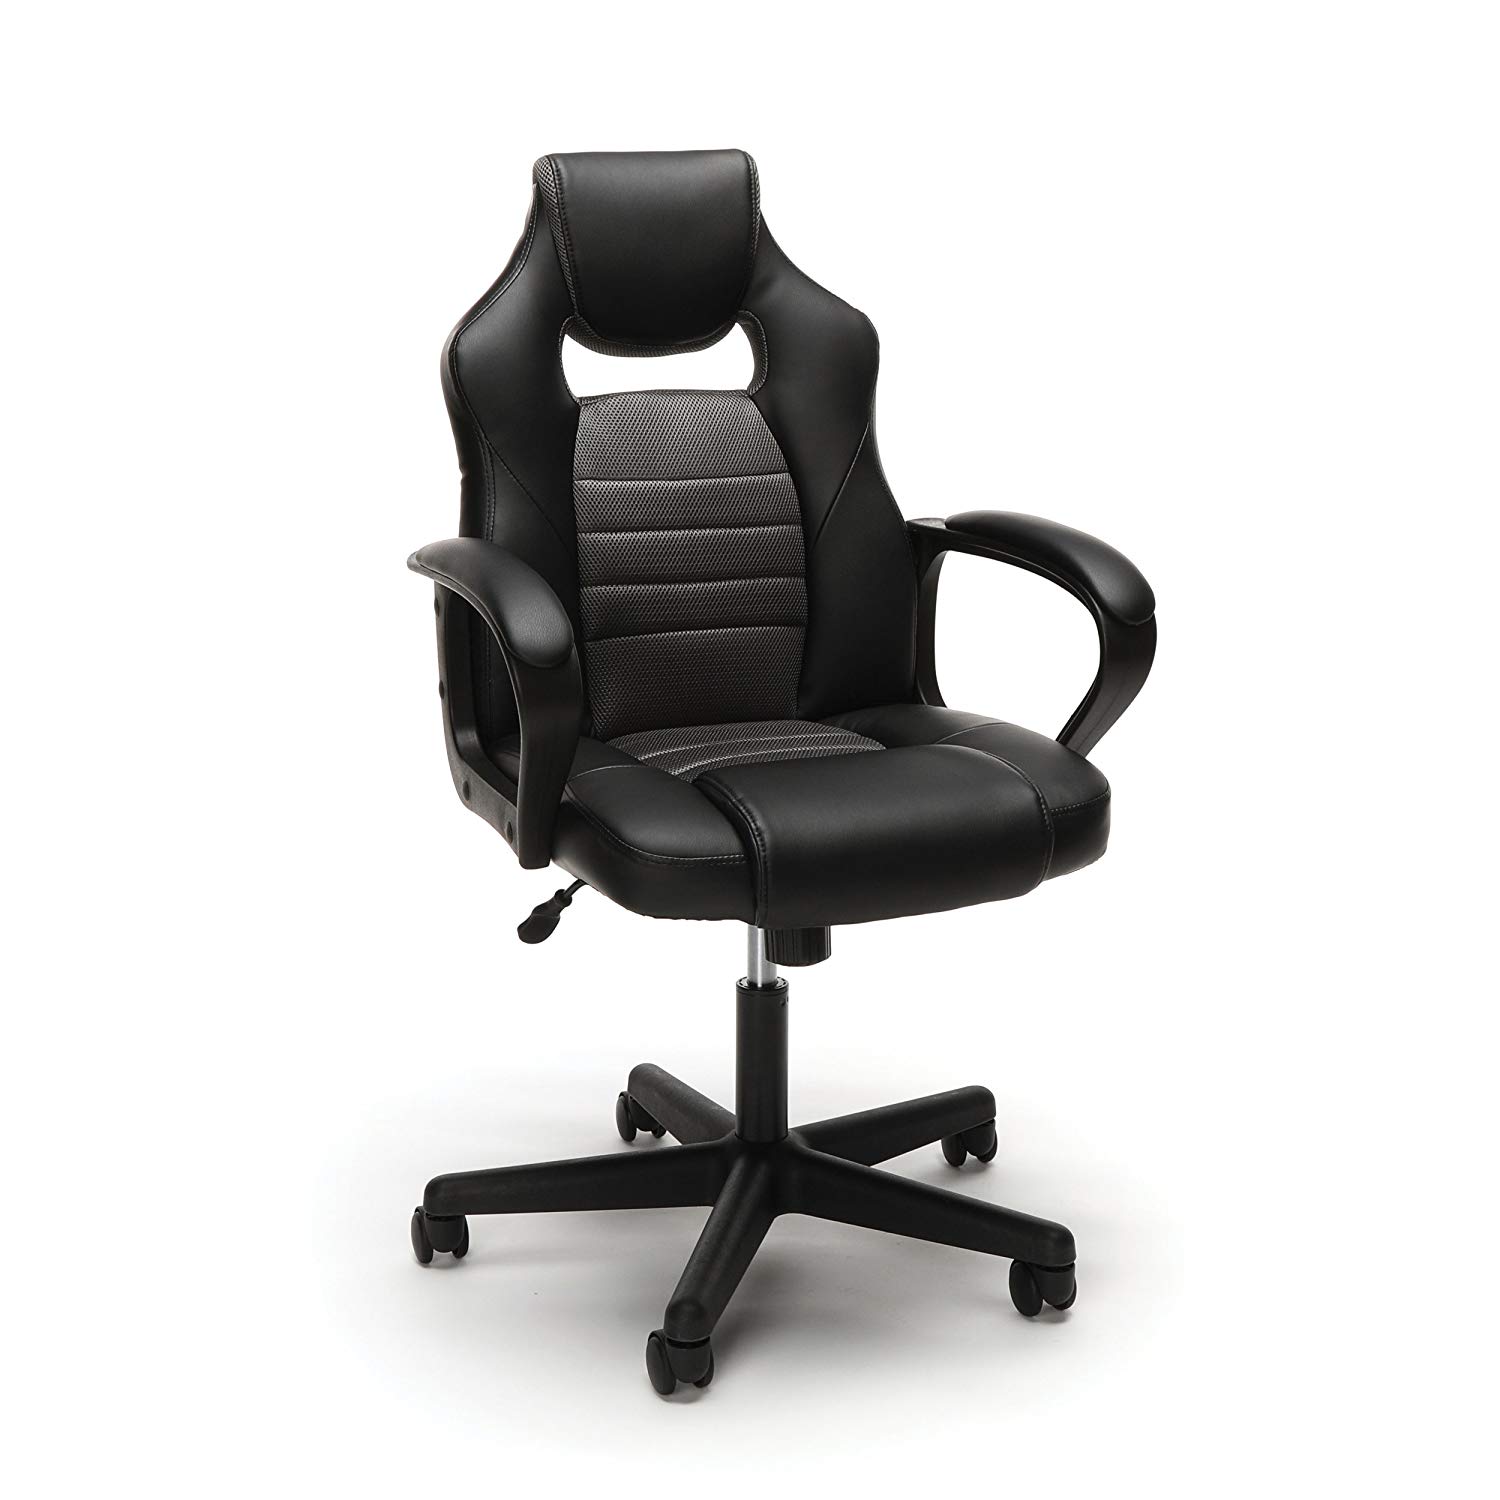 Top 10 Best Cheap Gaming Chairs Under 100$ in 2022 - For Gamers